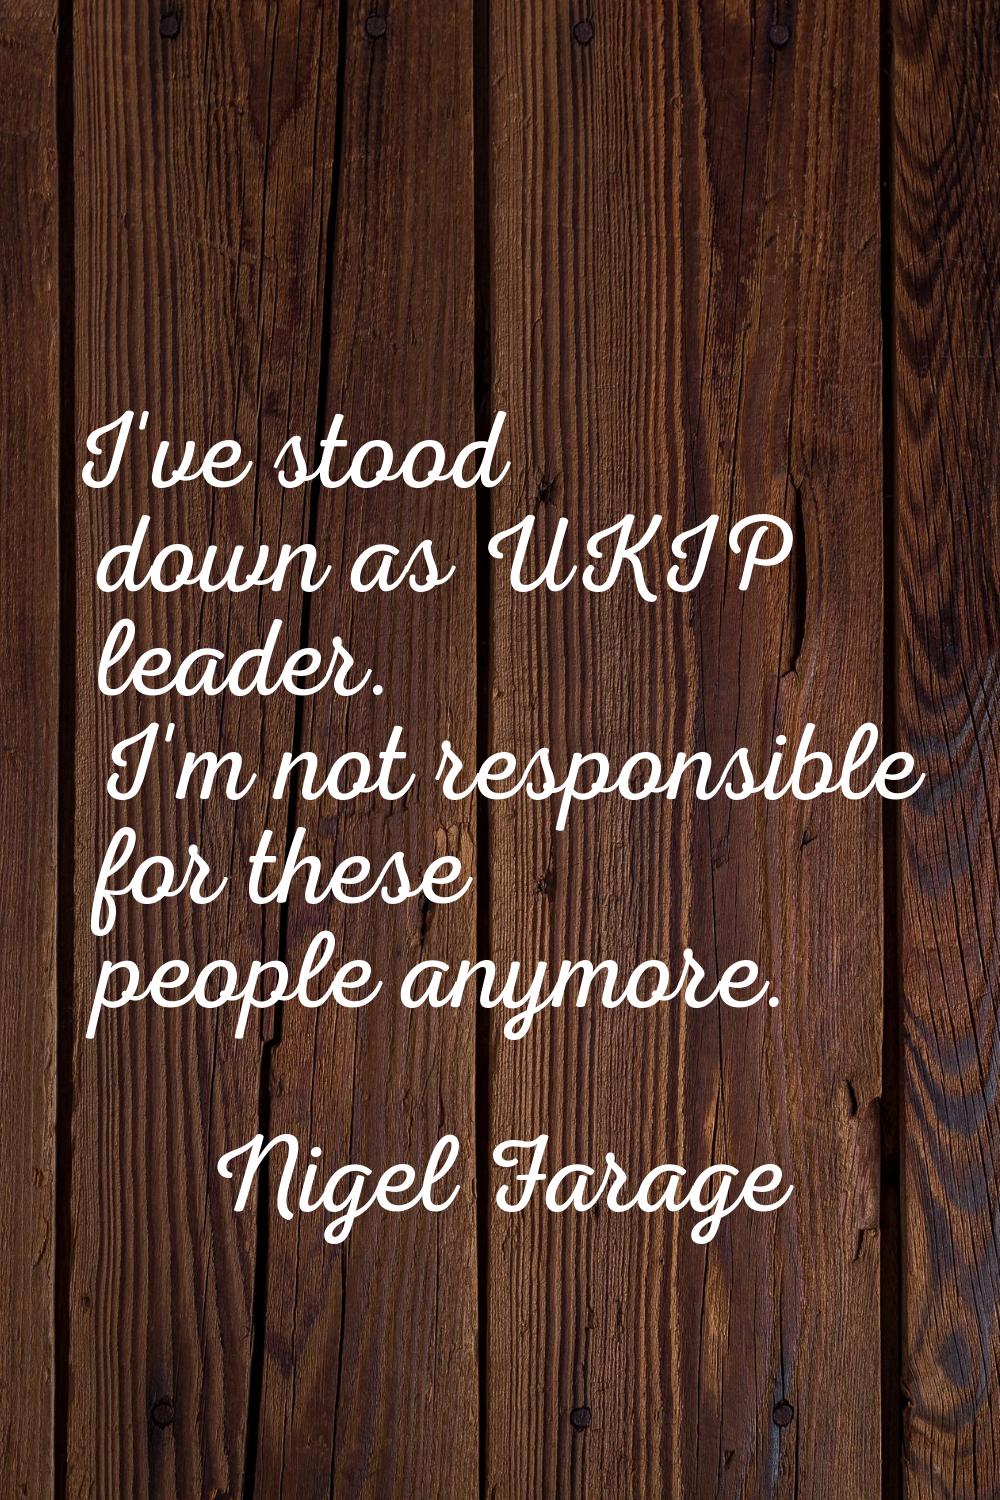 I've stood down as UKIP leader. I'm not responsible for these people anymore.